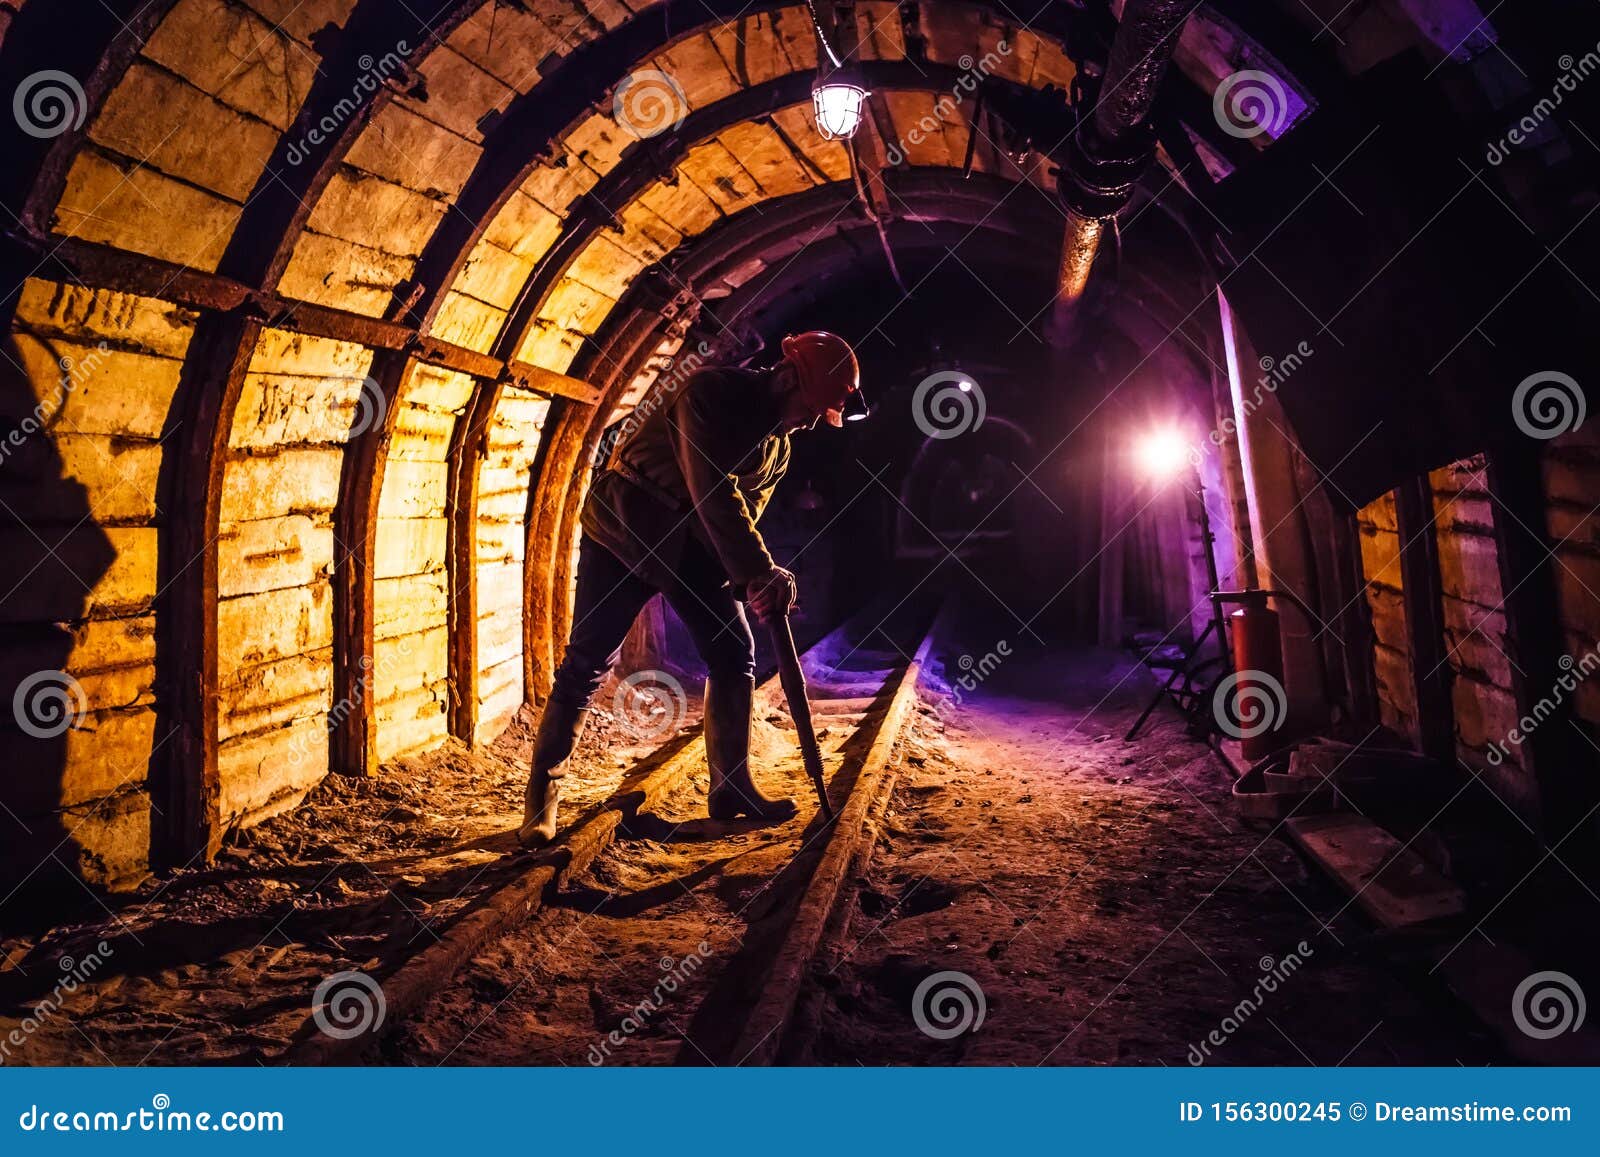 miner working a jackhammer in a coal mine. work in a coal mine. portrait of a miner.